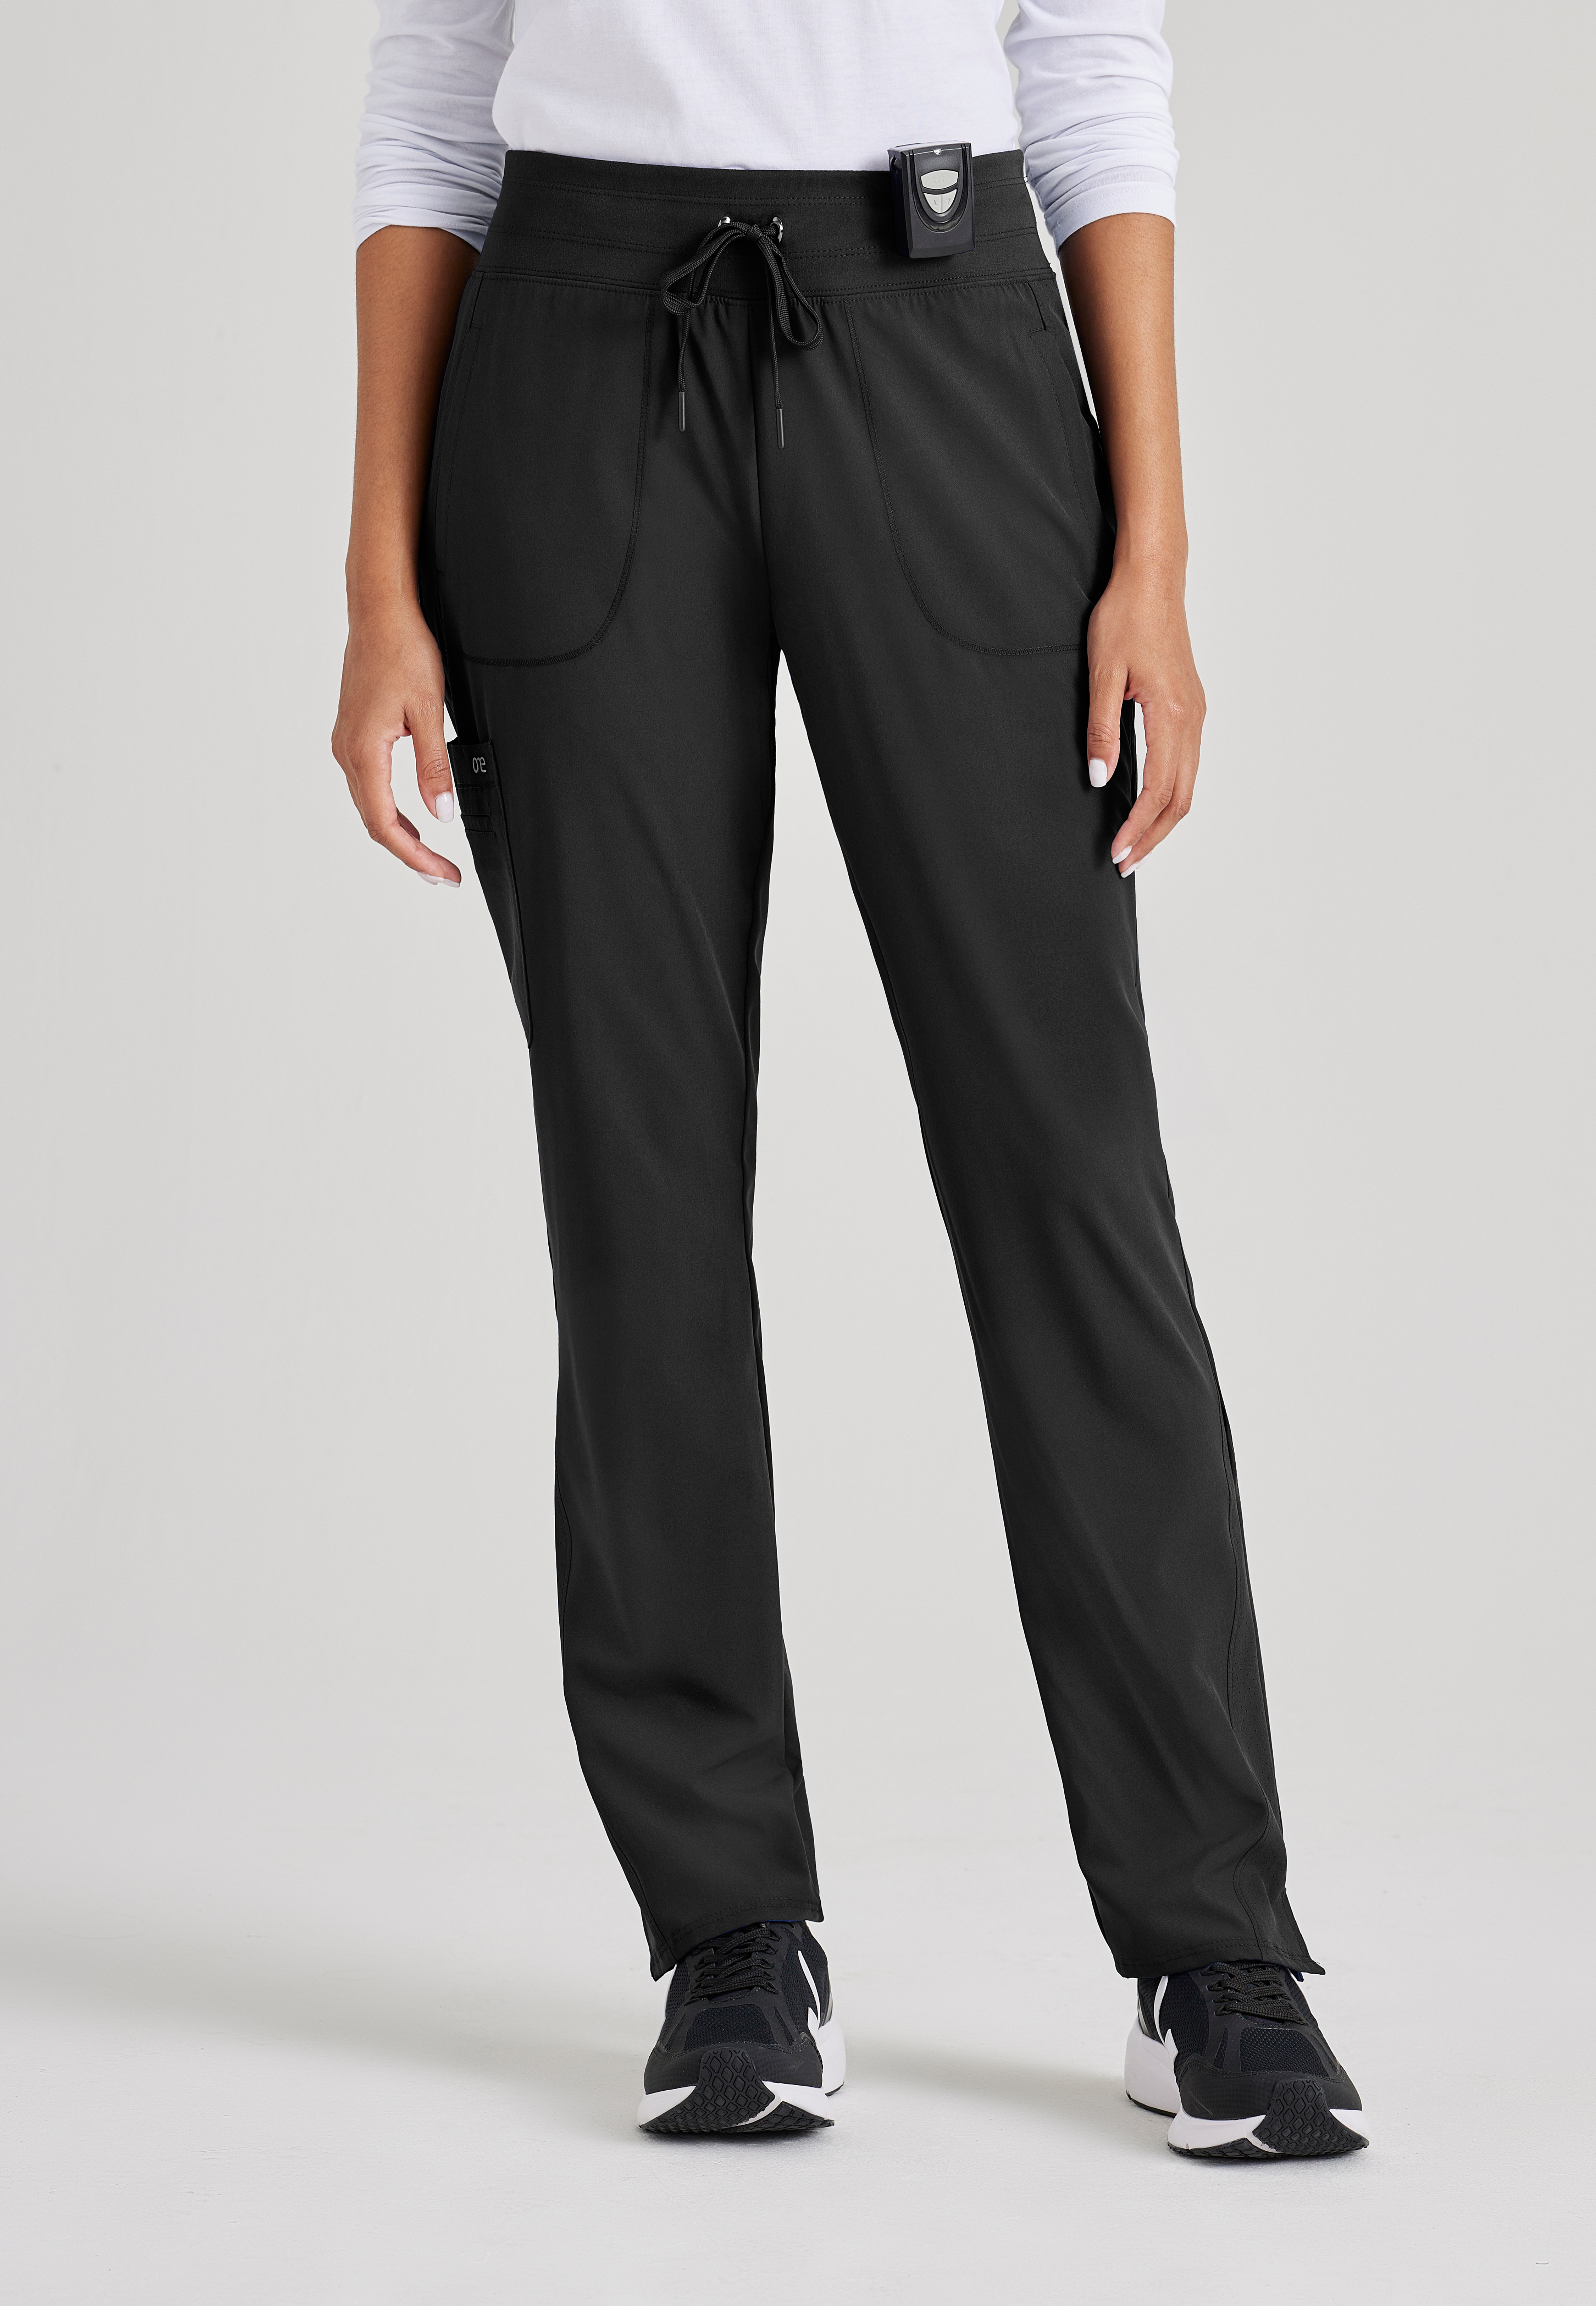 Barco One Uplift Pant-Barco One